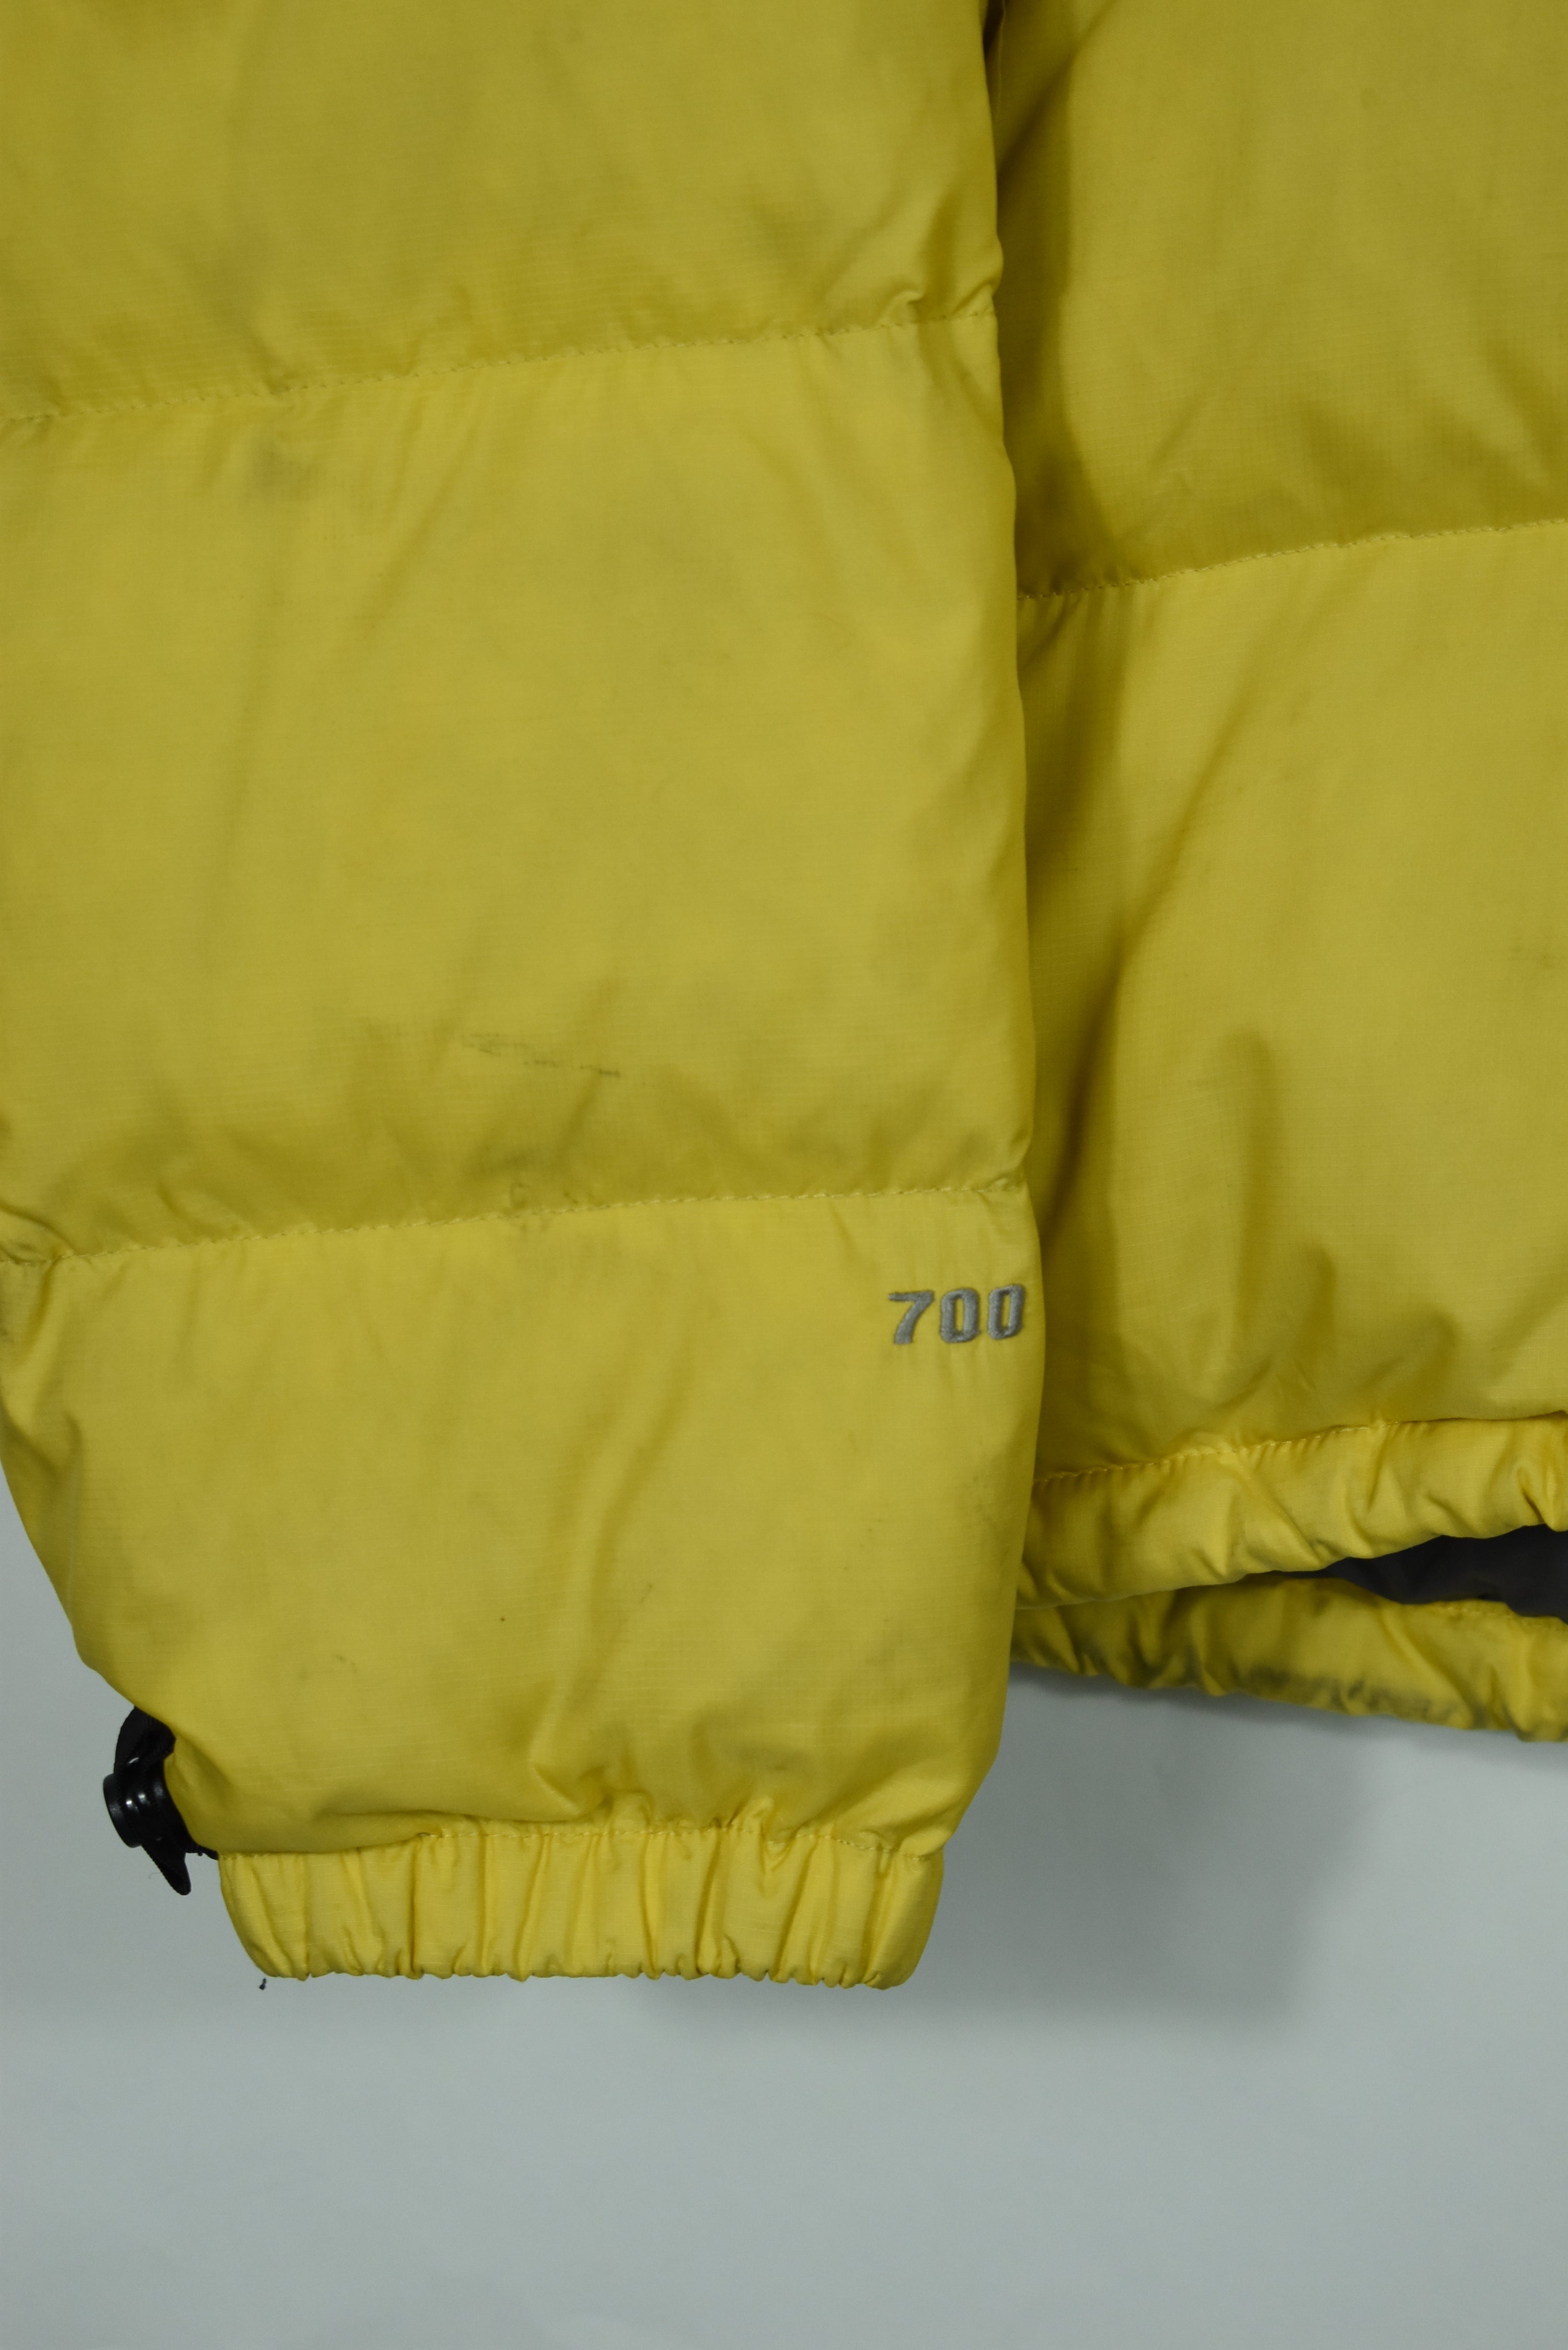 VINTAGE NORTH FACE NUPTSE 700 PUFFER YELLOW LARGE